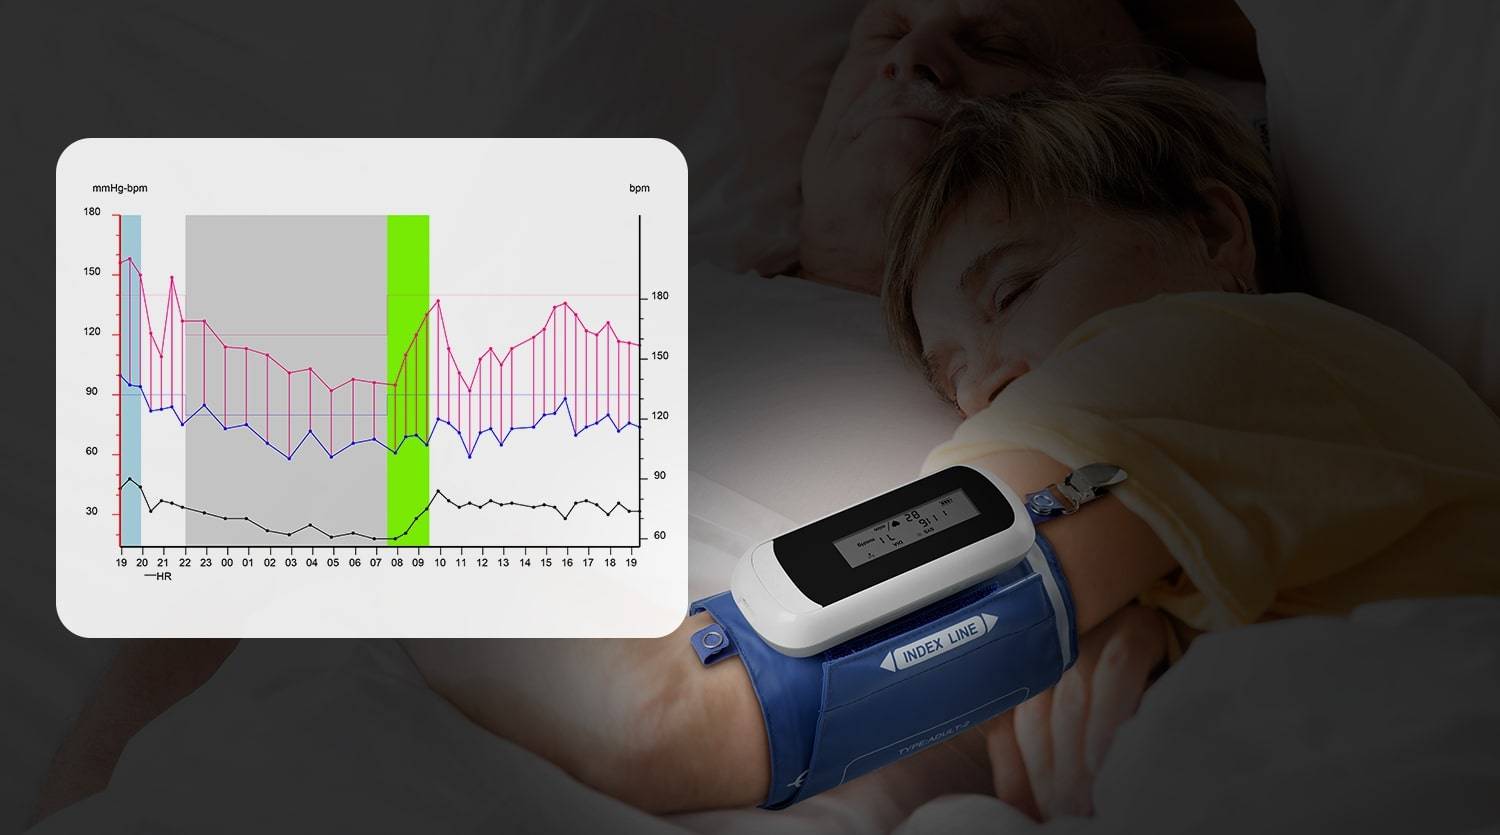 ABPM tracks blood pressure 24/7 and indicates the whole day's blood pressure fluctuation.